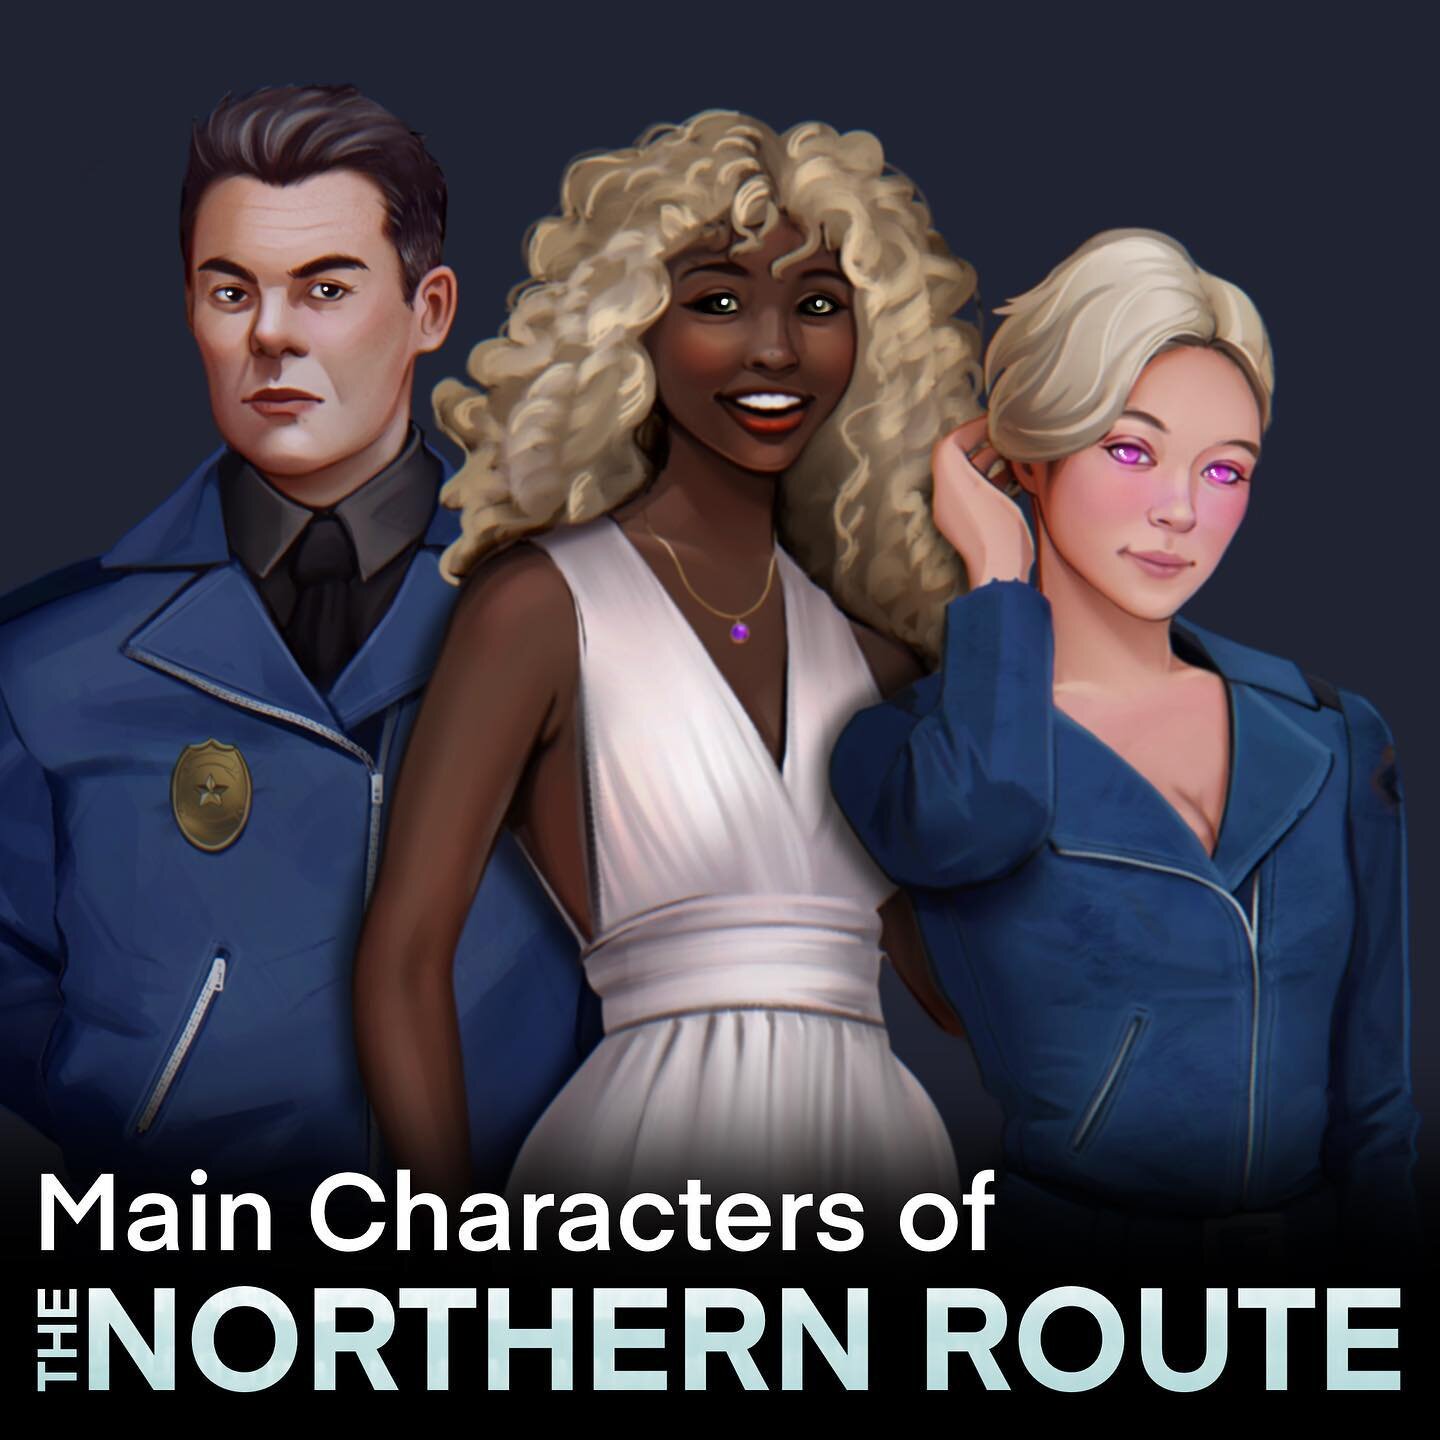 The three main characters of The Northern Route! From the left, Cal, Piata, and Vesta. Check out their individual bios in other posts or on our website.

#scificharacter #scificharacterdesign #scificharacters #scificharacterart